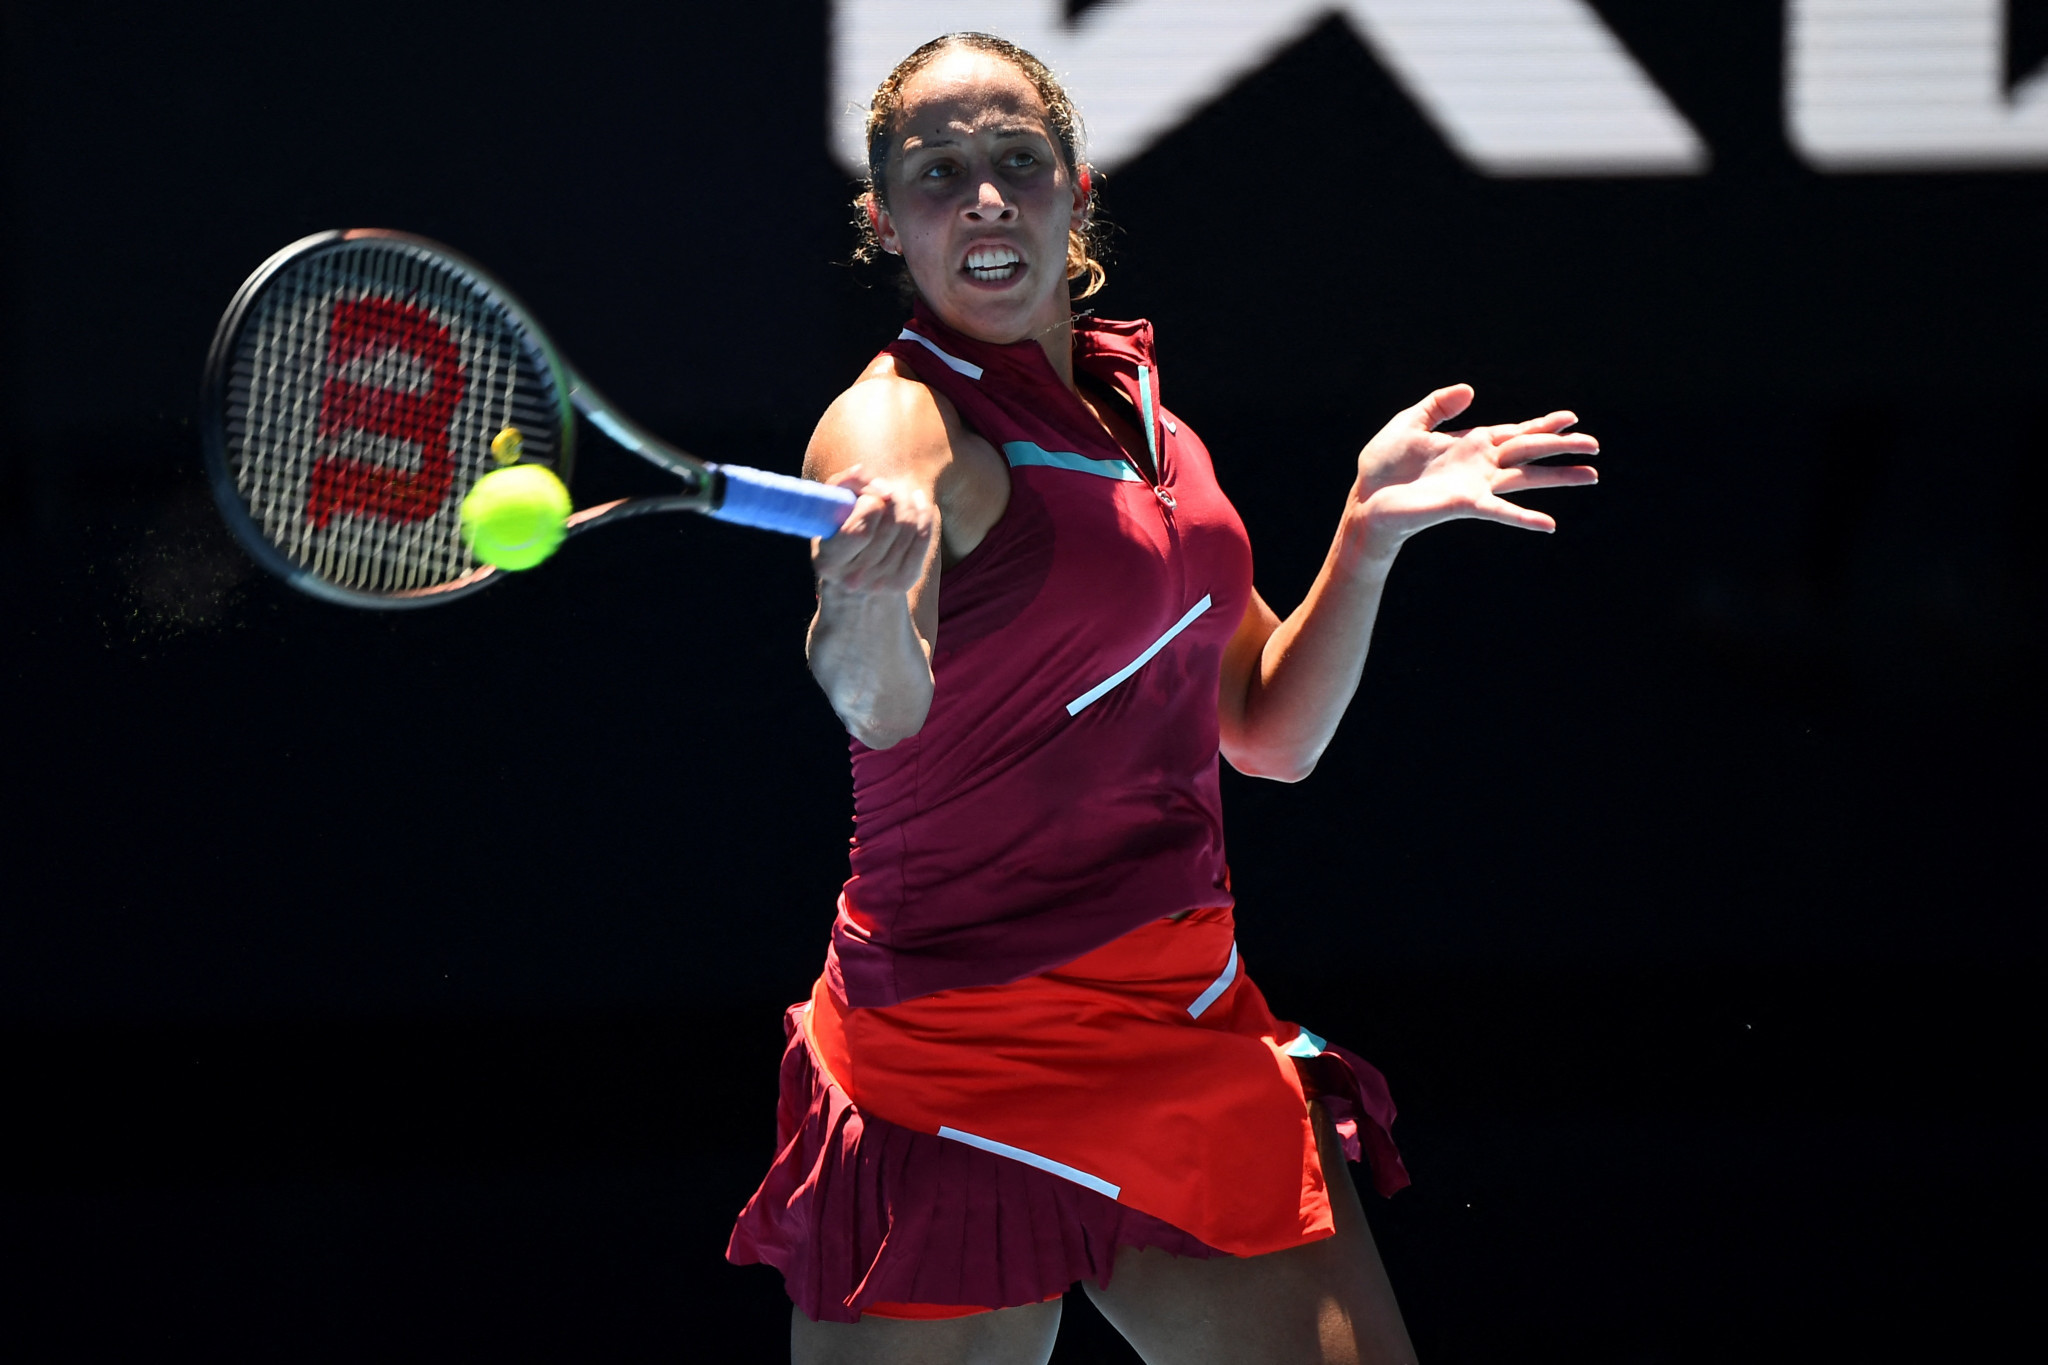 Unseeded American Madison Keys produced a stunning 6-3, 6-2 upset against world number four Barbora Krejčíková of the Czech Republic at the Rod Laver Arena ©Getty Images